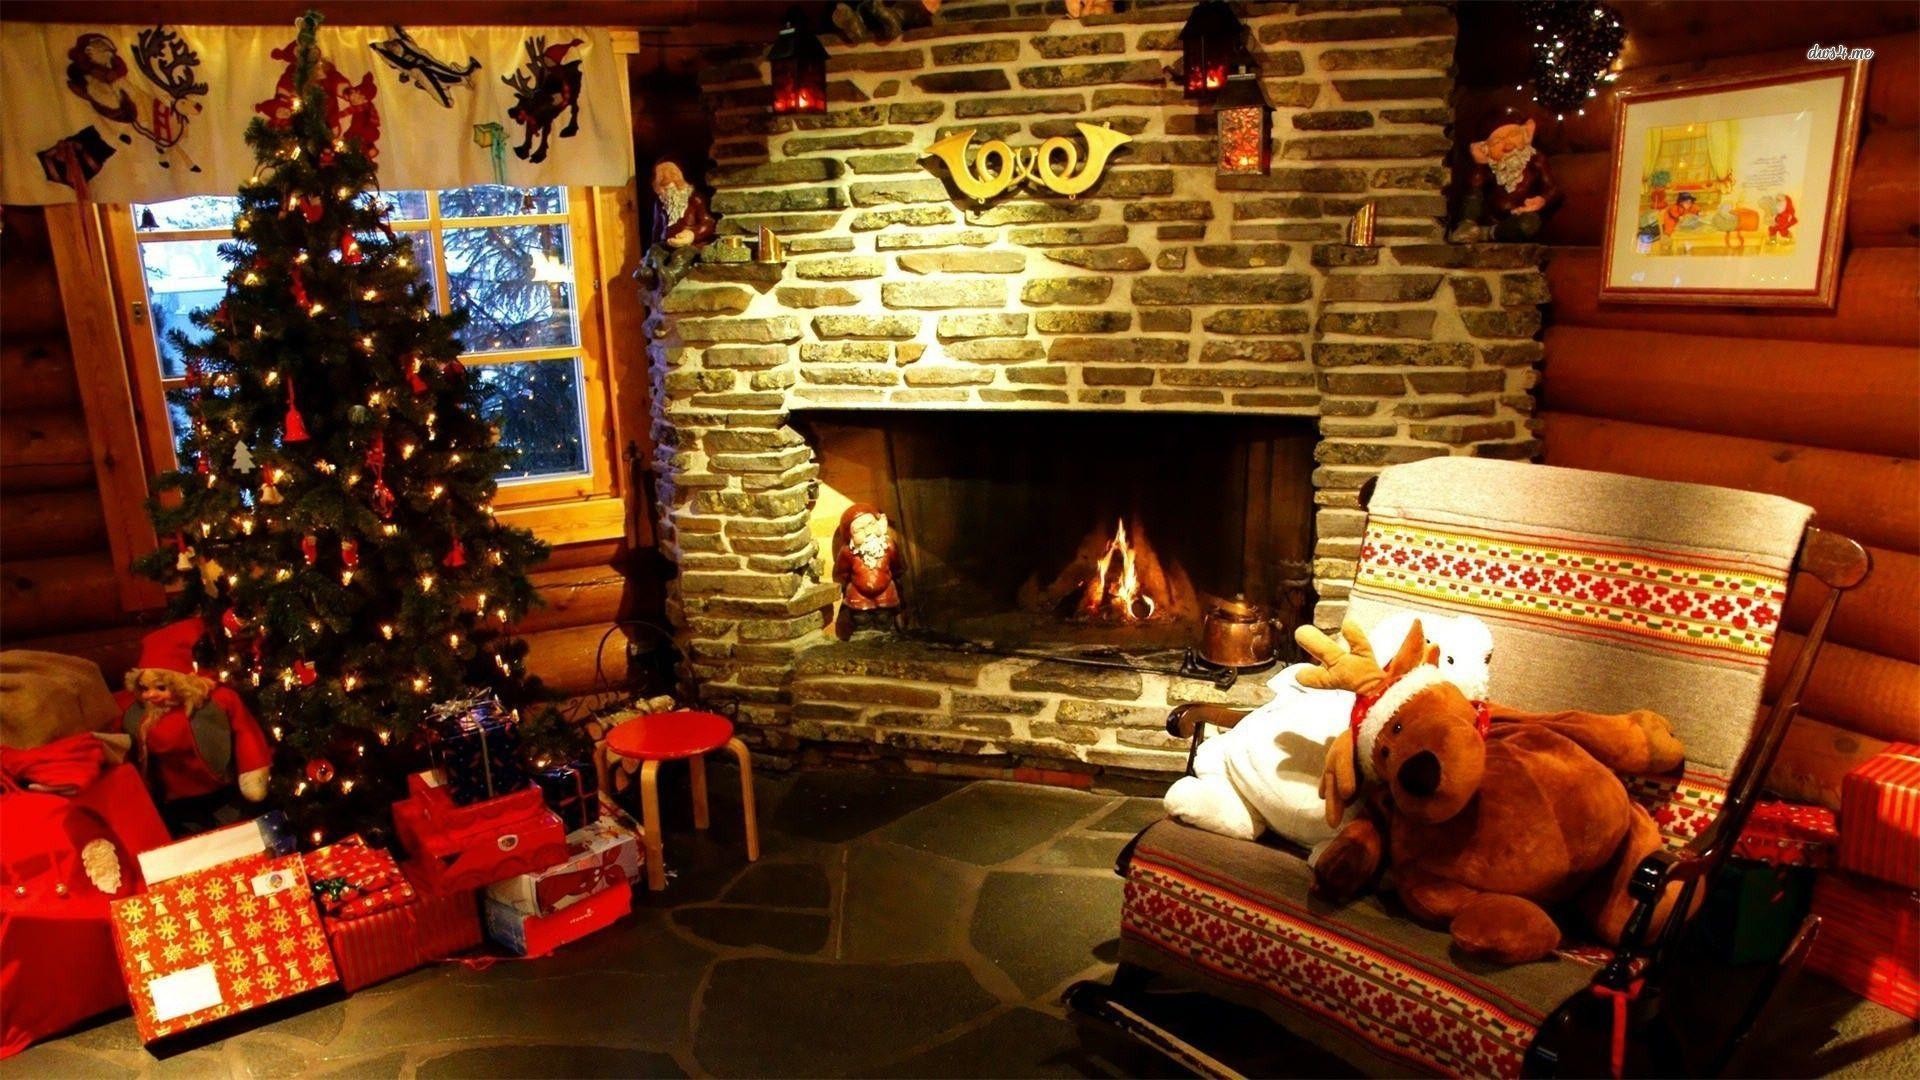 1920x1080 Christmas fireplace wallpaper - Holiday wallpapers - #